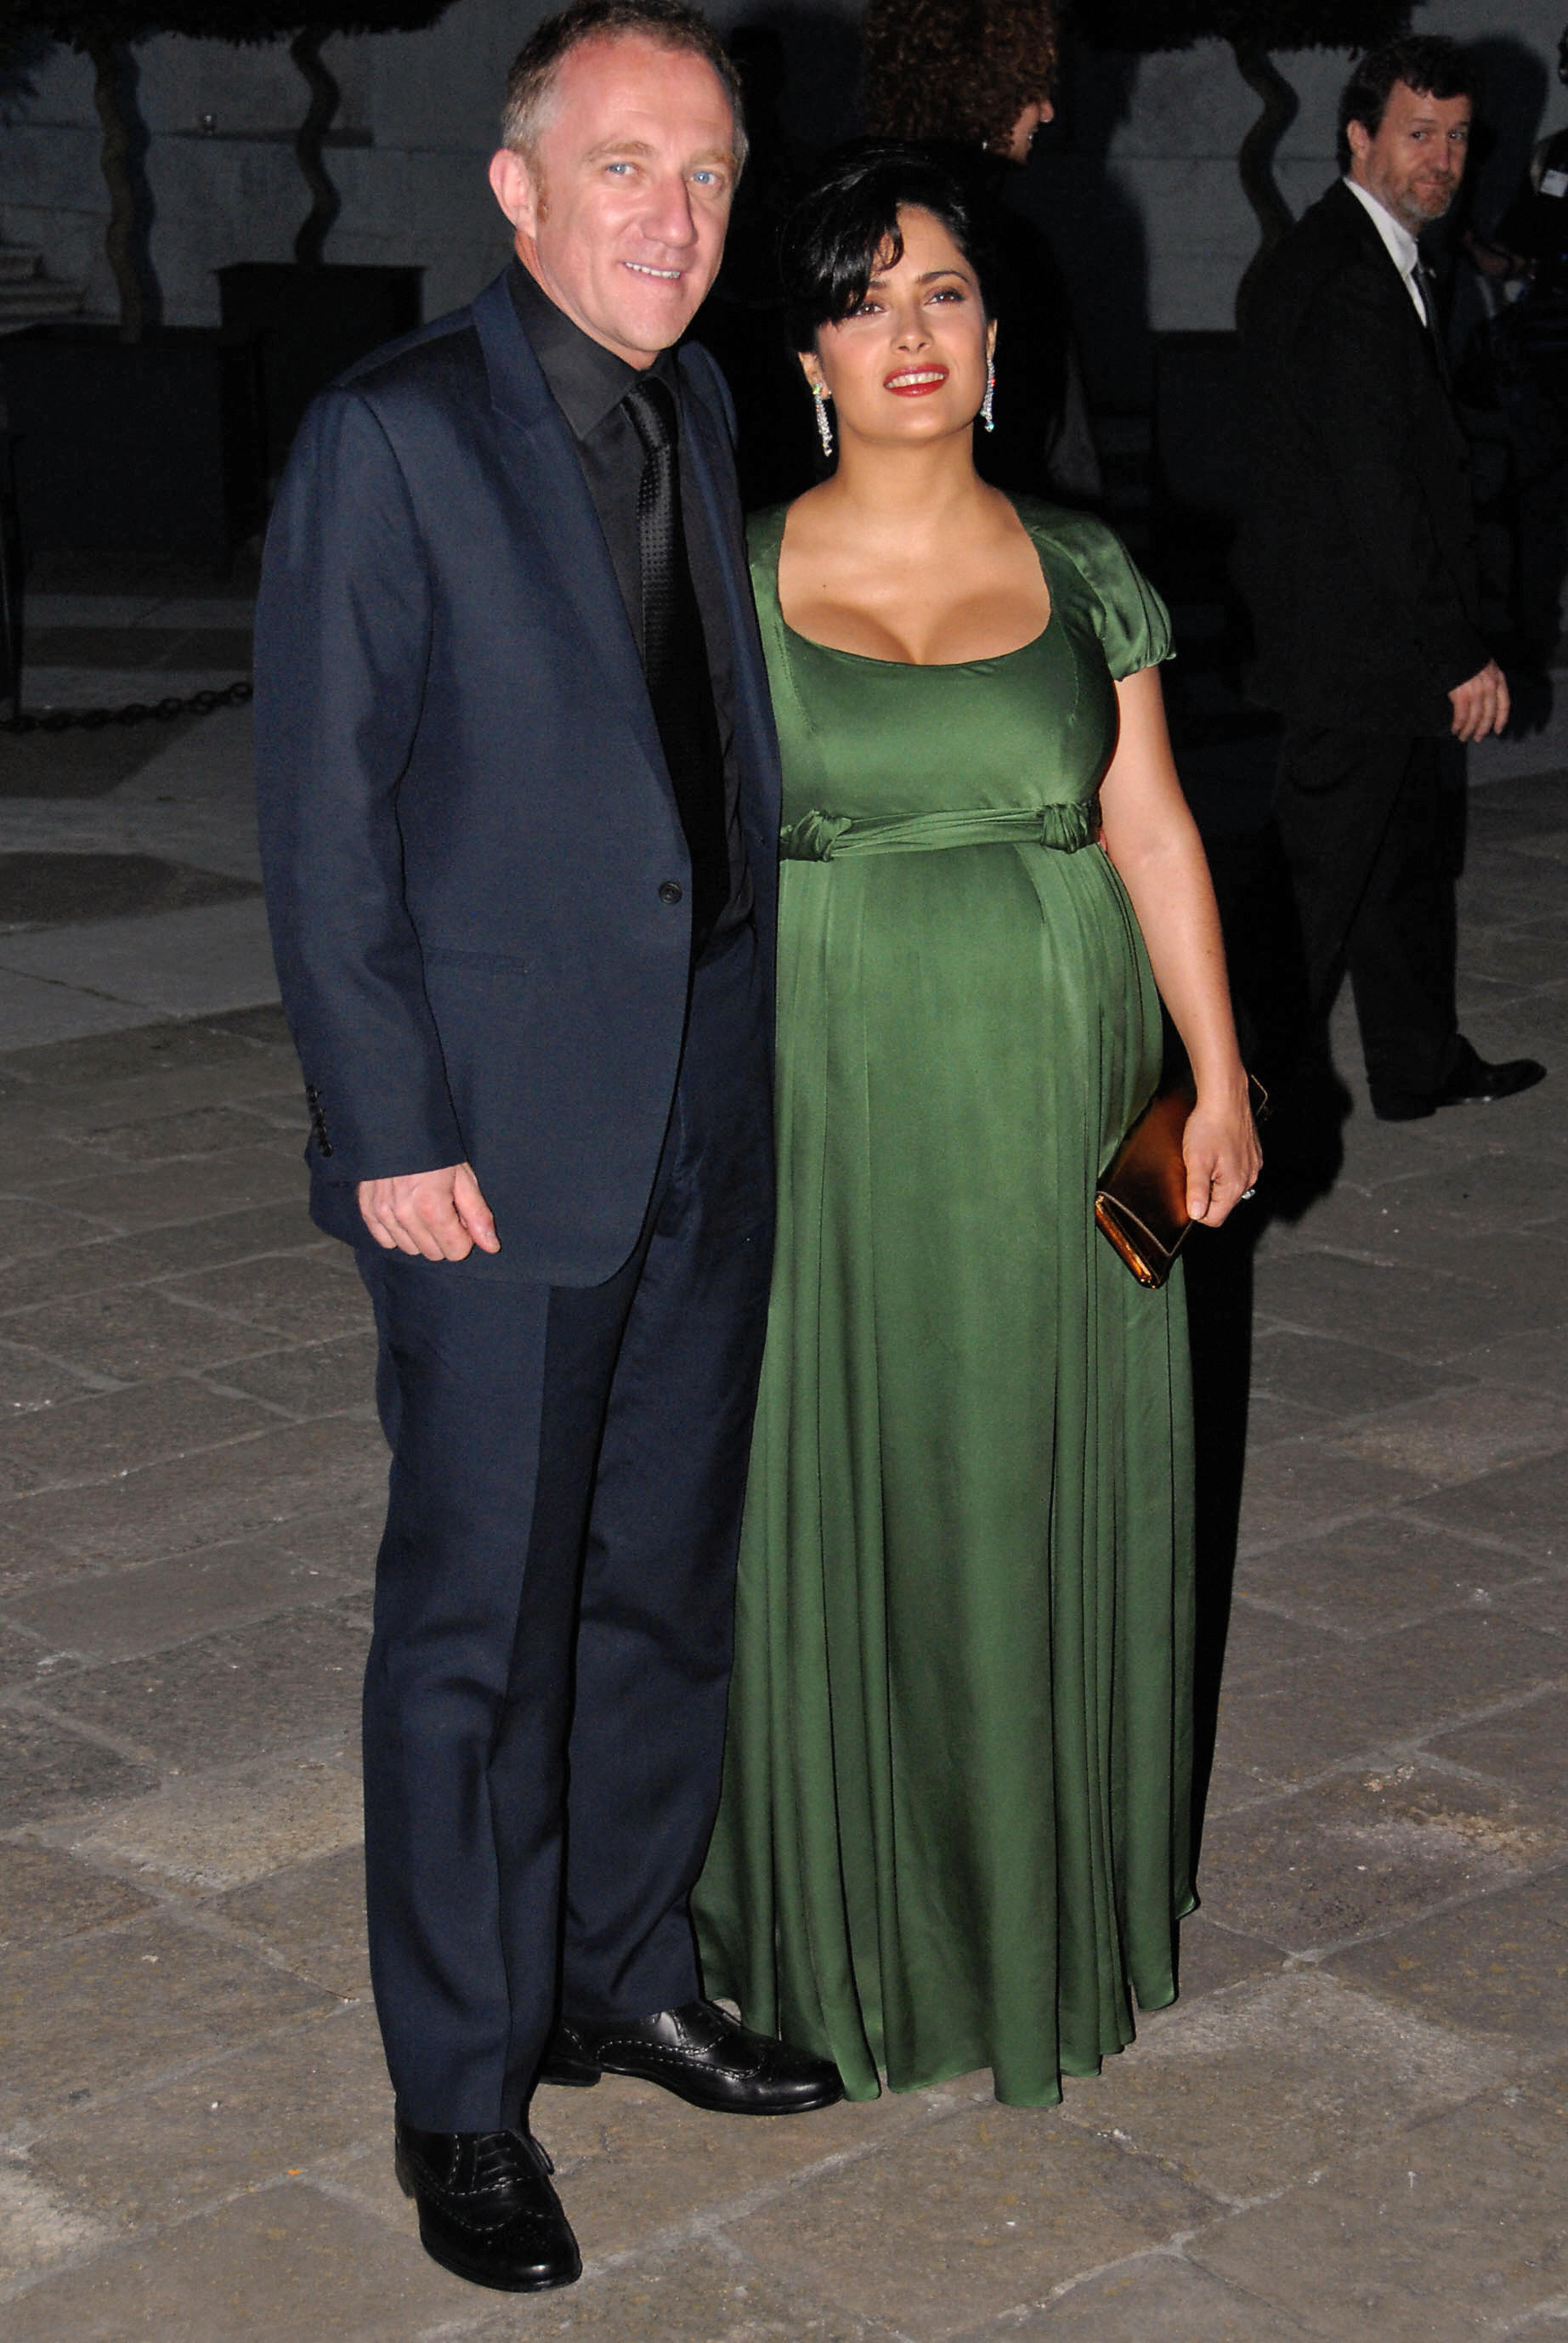 French buisinessman Francois Pinault's son Francois-Henri Pinault (L) and his compagnon Mexican actress Salma Hayek pose as they arrive at a private dinner 08 June 2007 at the Fondazione Cini during the 52nd annual Biennale, in Venice | Source: Getty Images